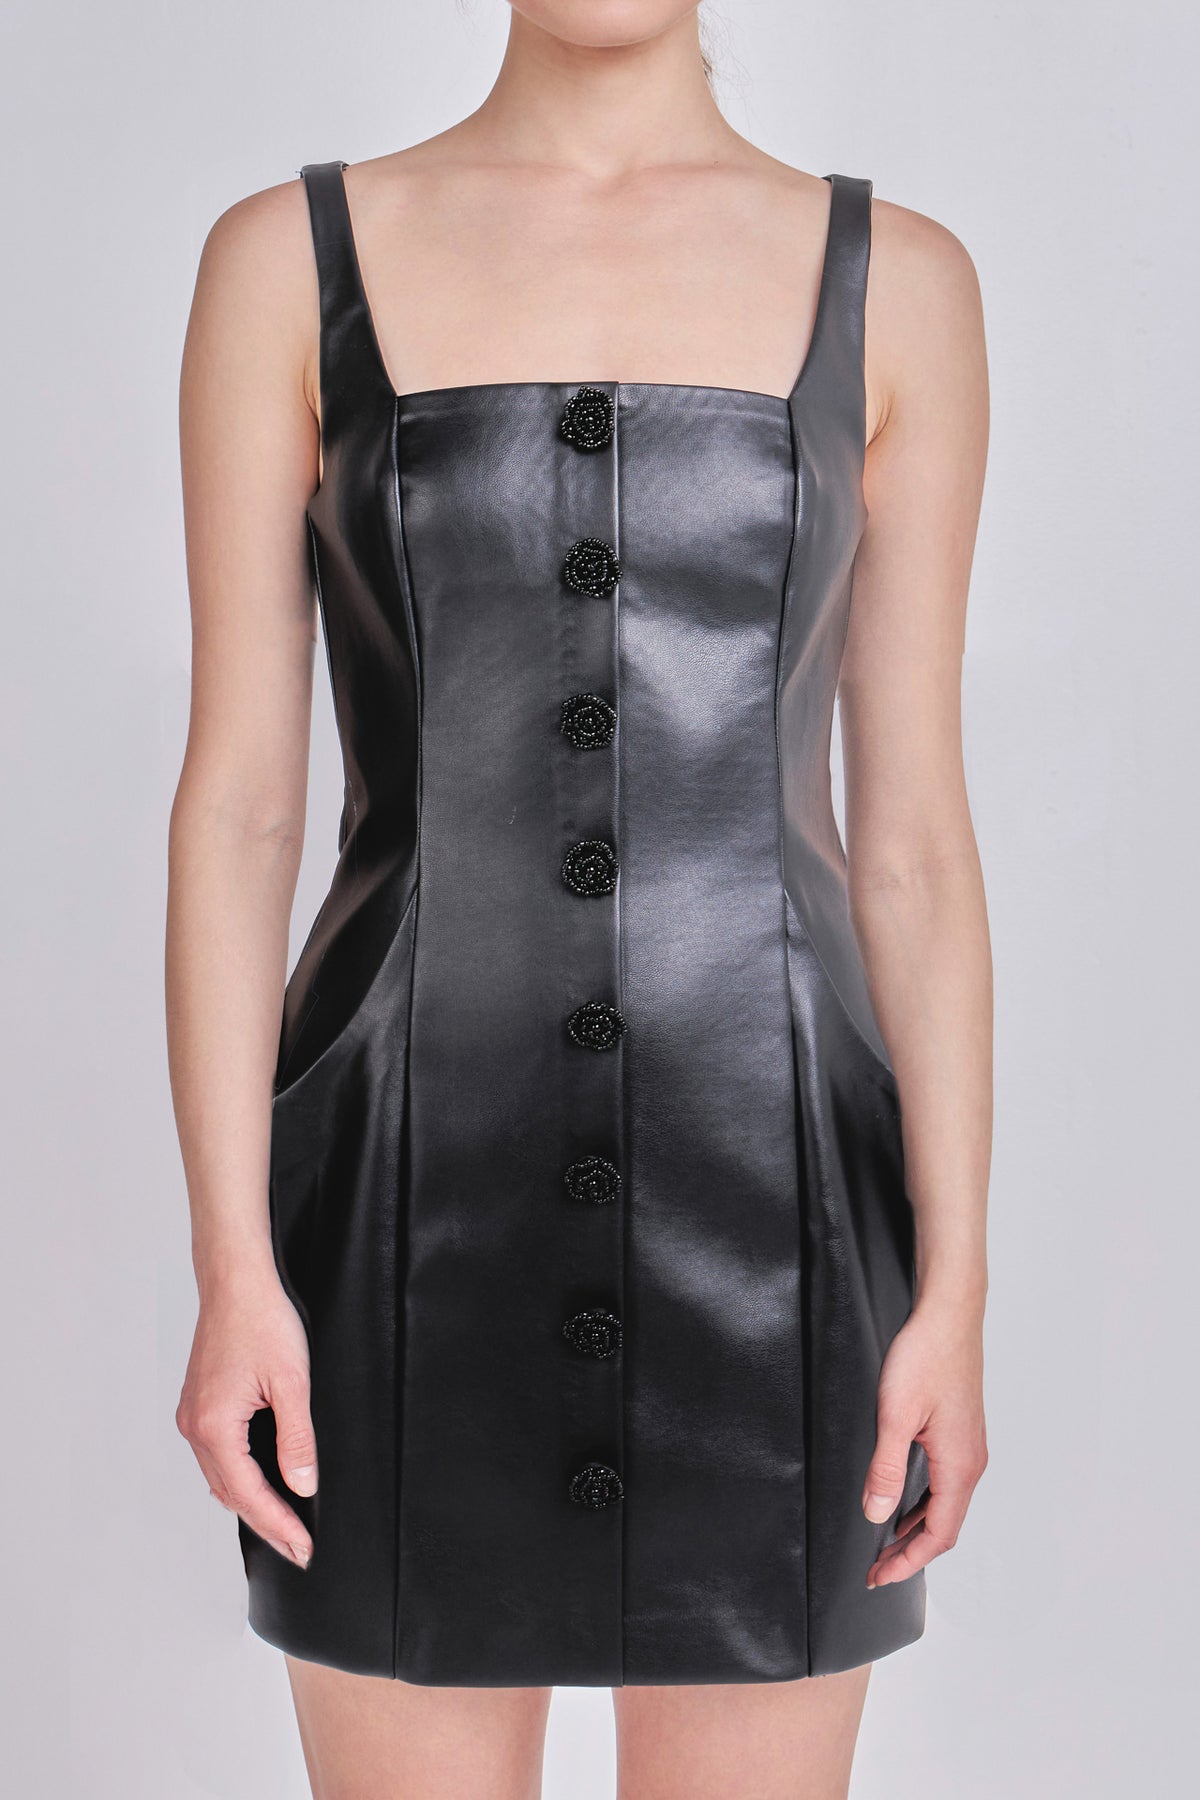 ENDLESS ROSE - Faux Leather Buttoned Mini Dress - DRESSES available at Objectrare